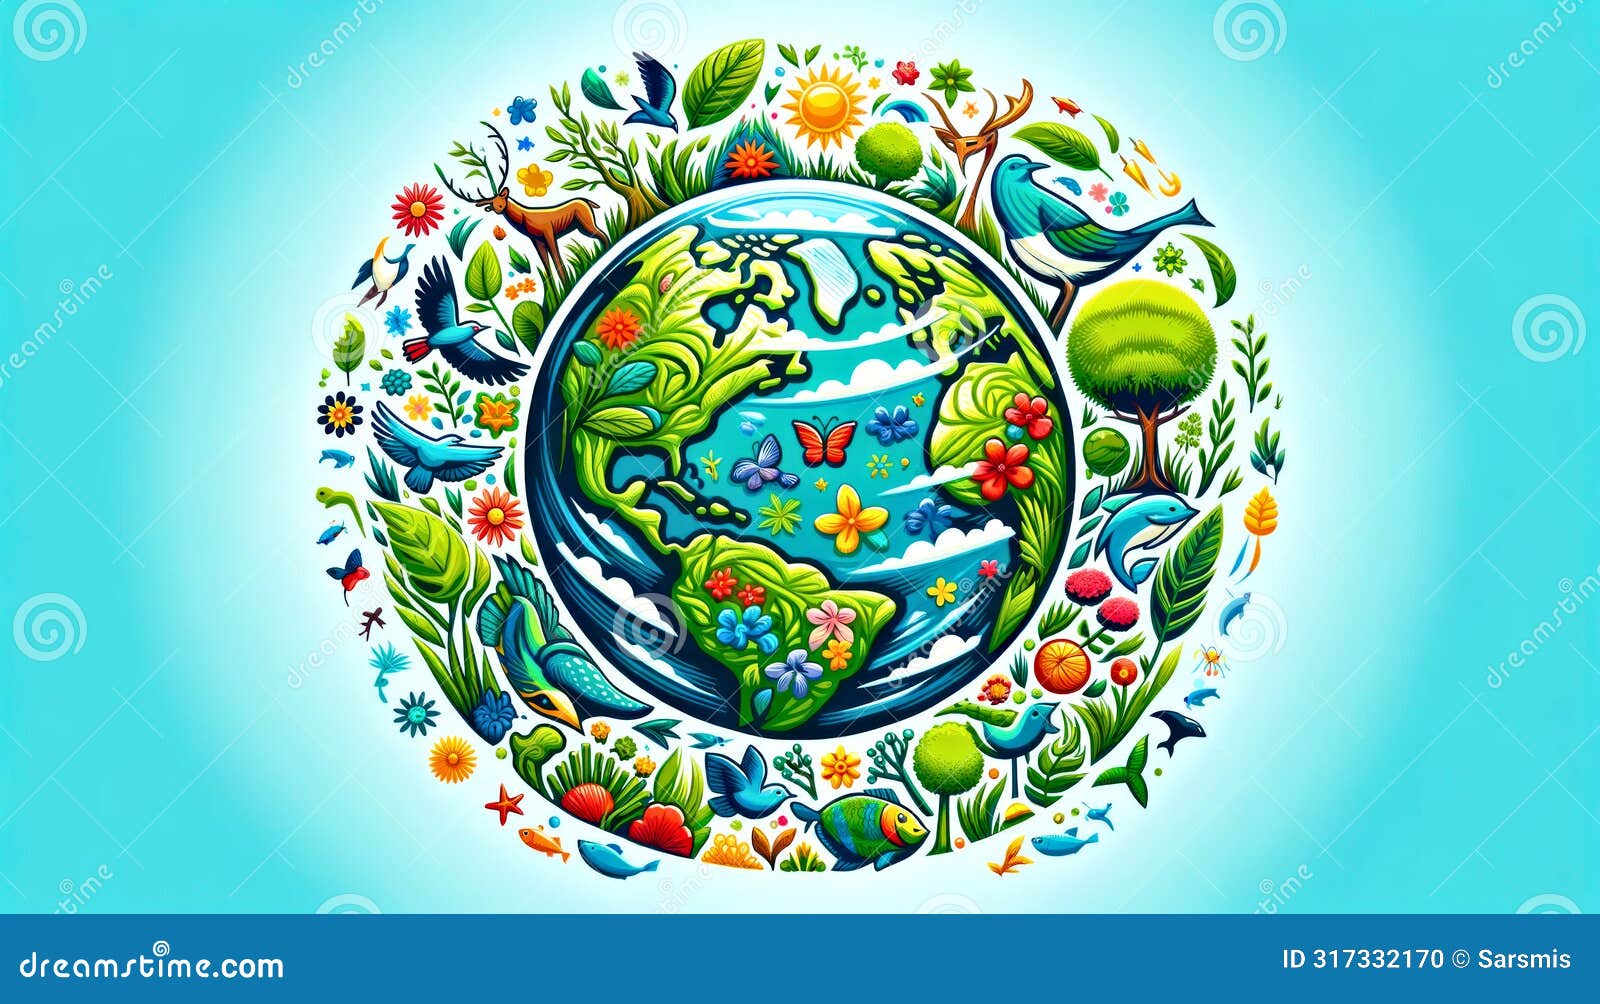 a stylized portrayal of the earth encompassed by flora and fauna highlights the interconnectedness of ecosystems and the